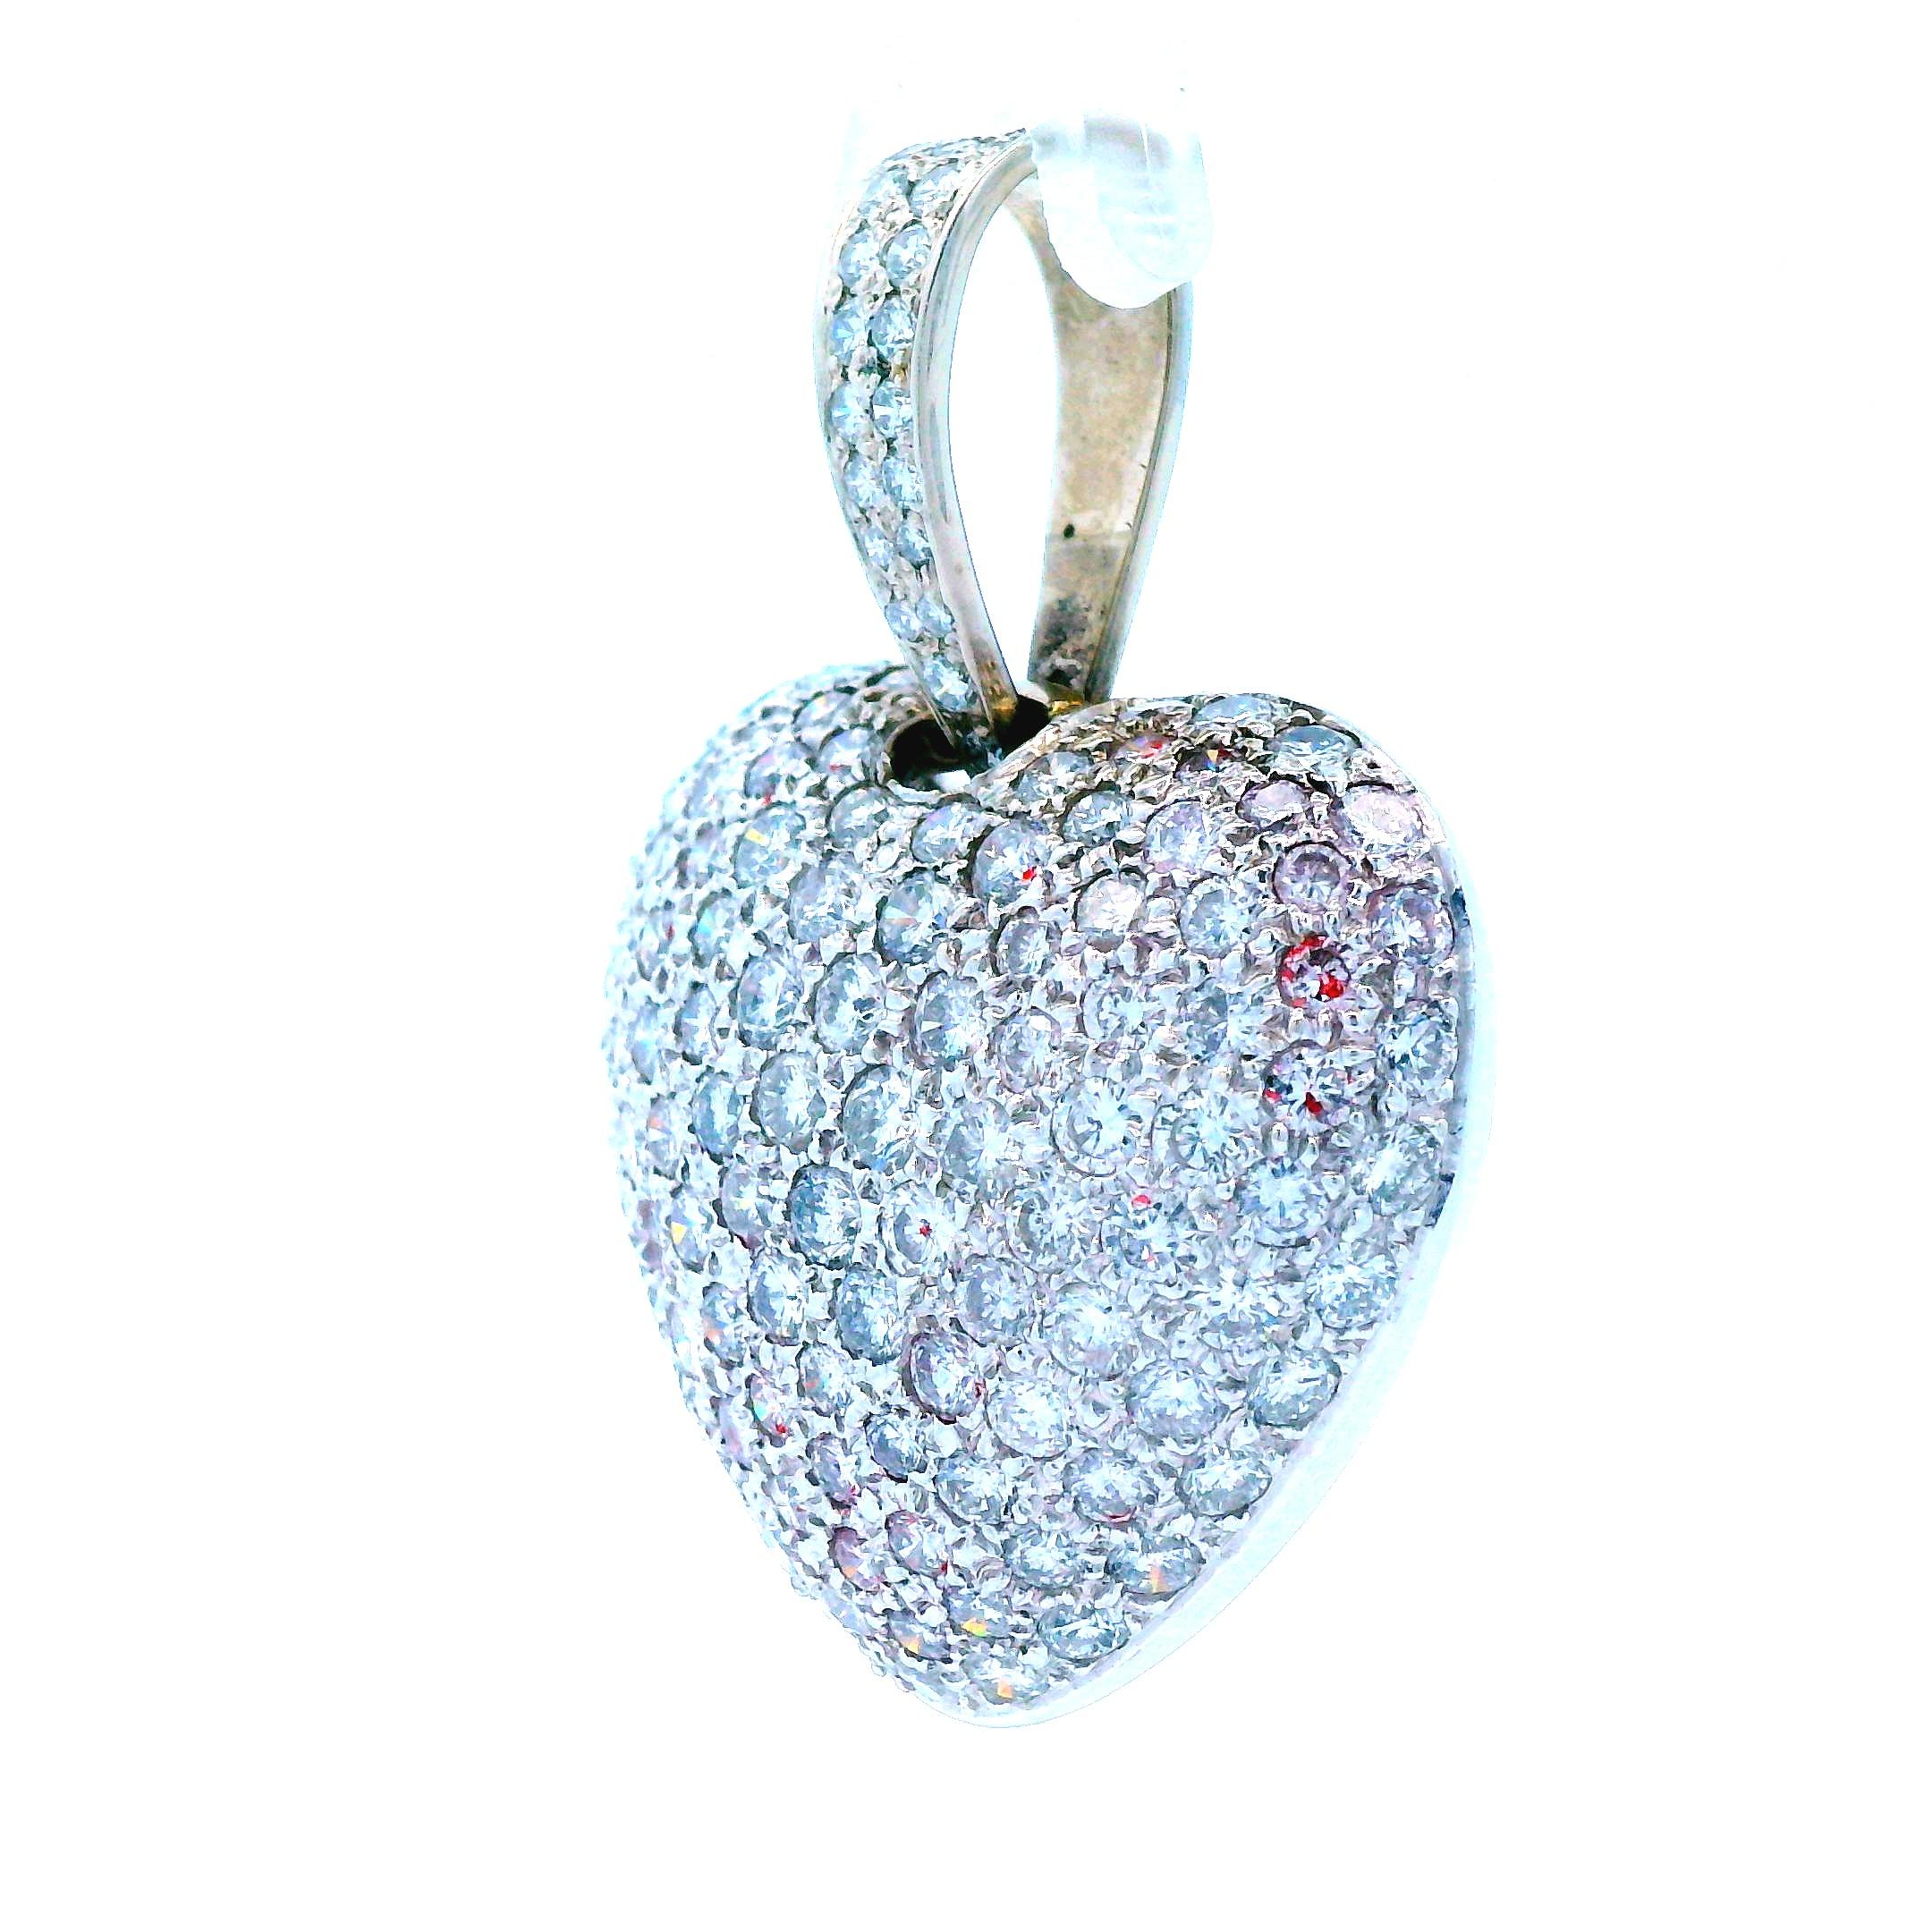 This fun and lovely pendant made in 14k white gold is a diamond pave puffy heart. With over 6.5 carats of round cut, VS2 clarity, G color diamonds, this pendent sparkles brightly and will not go un-noticed. The articulated bail also features